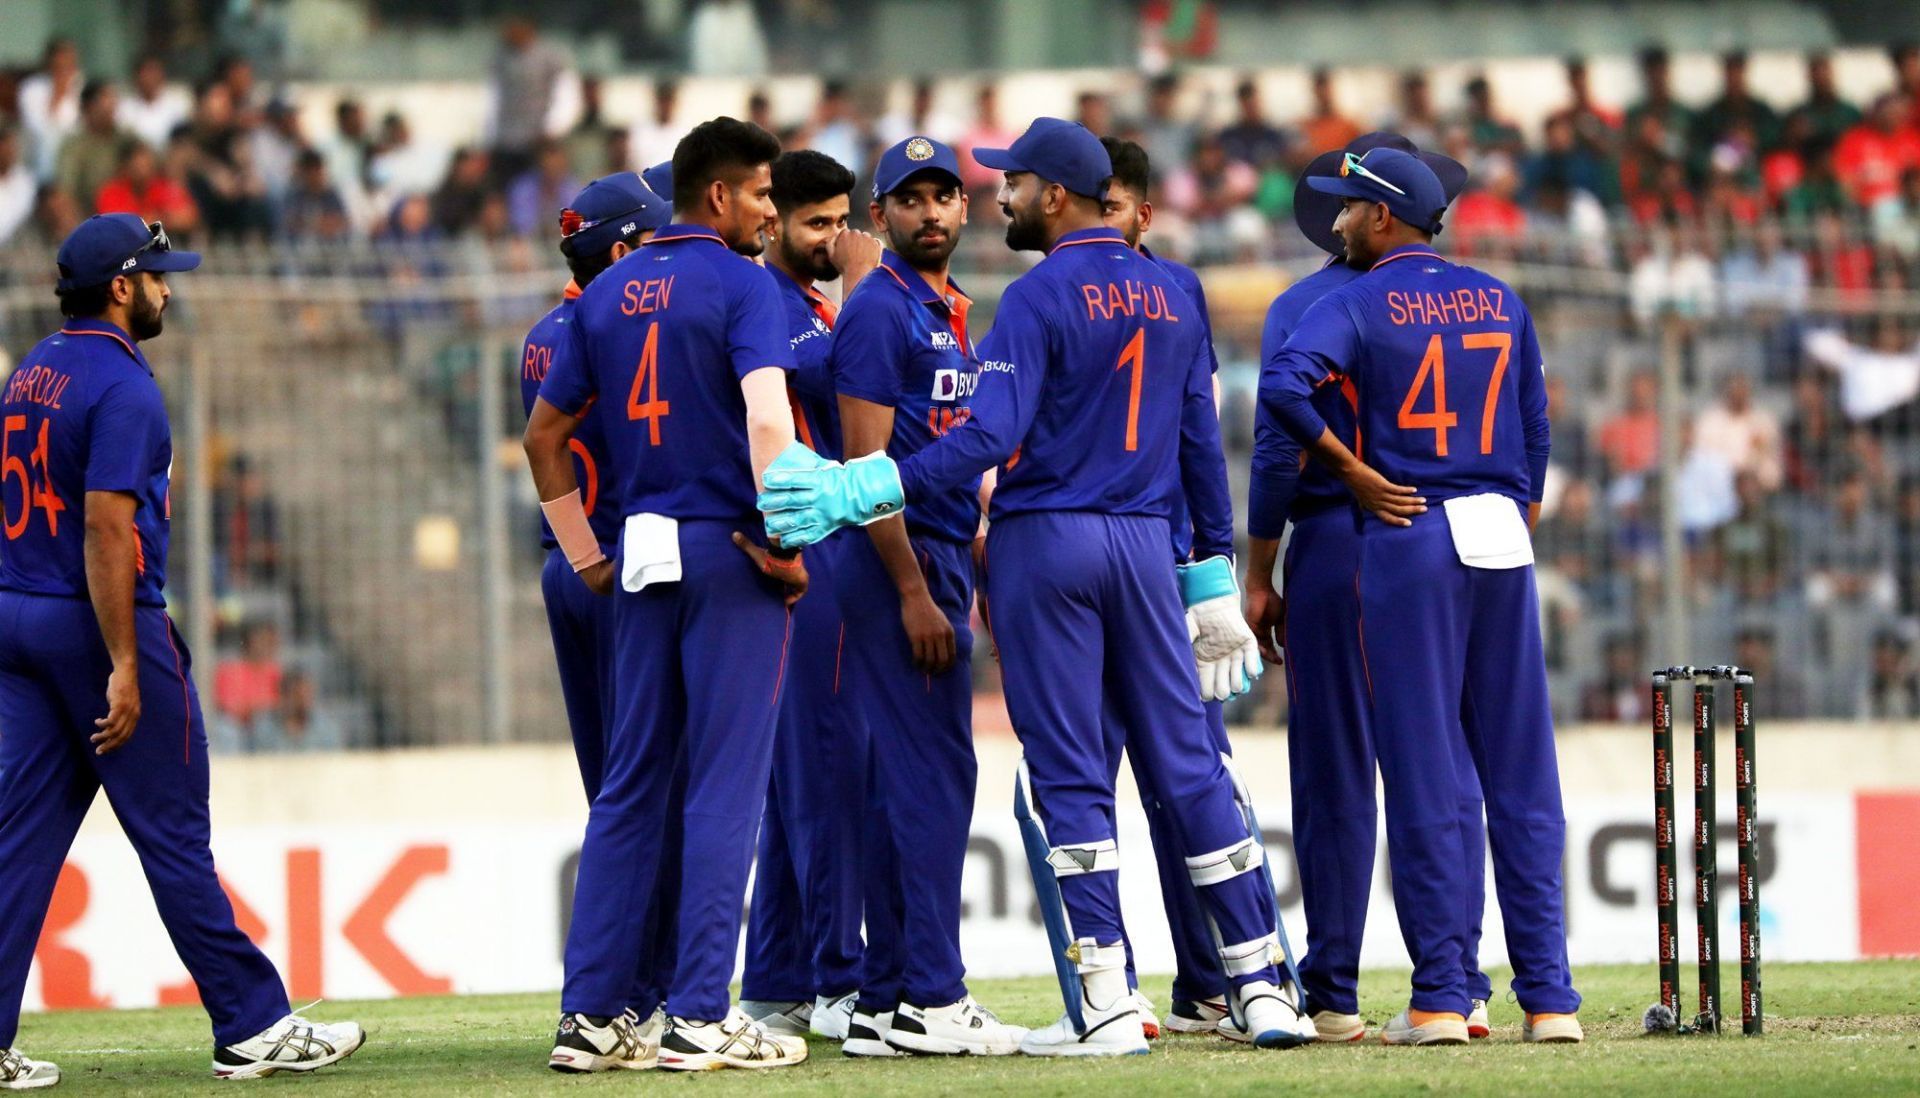 India lost the opening ODI against Bangladesh on Sunday [Pic Credit: BCCI]